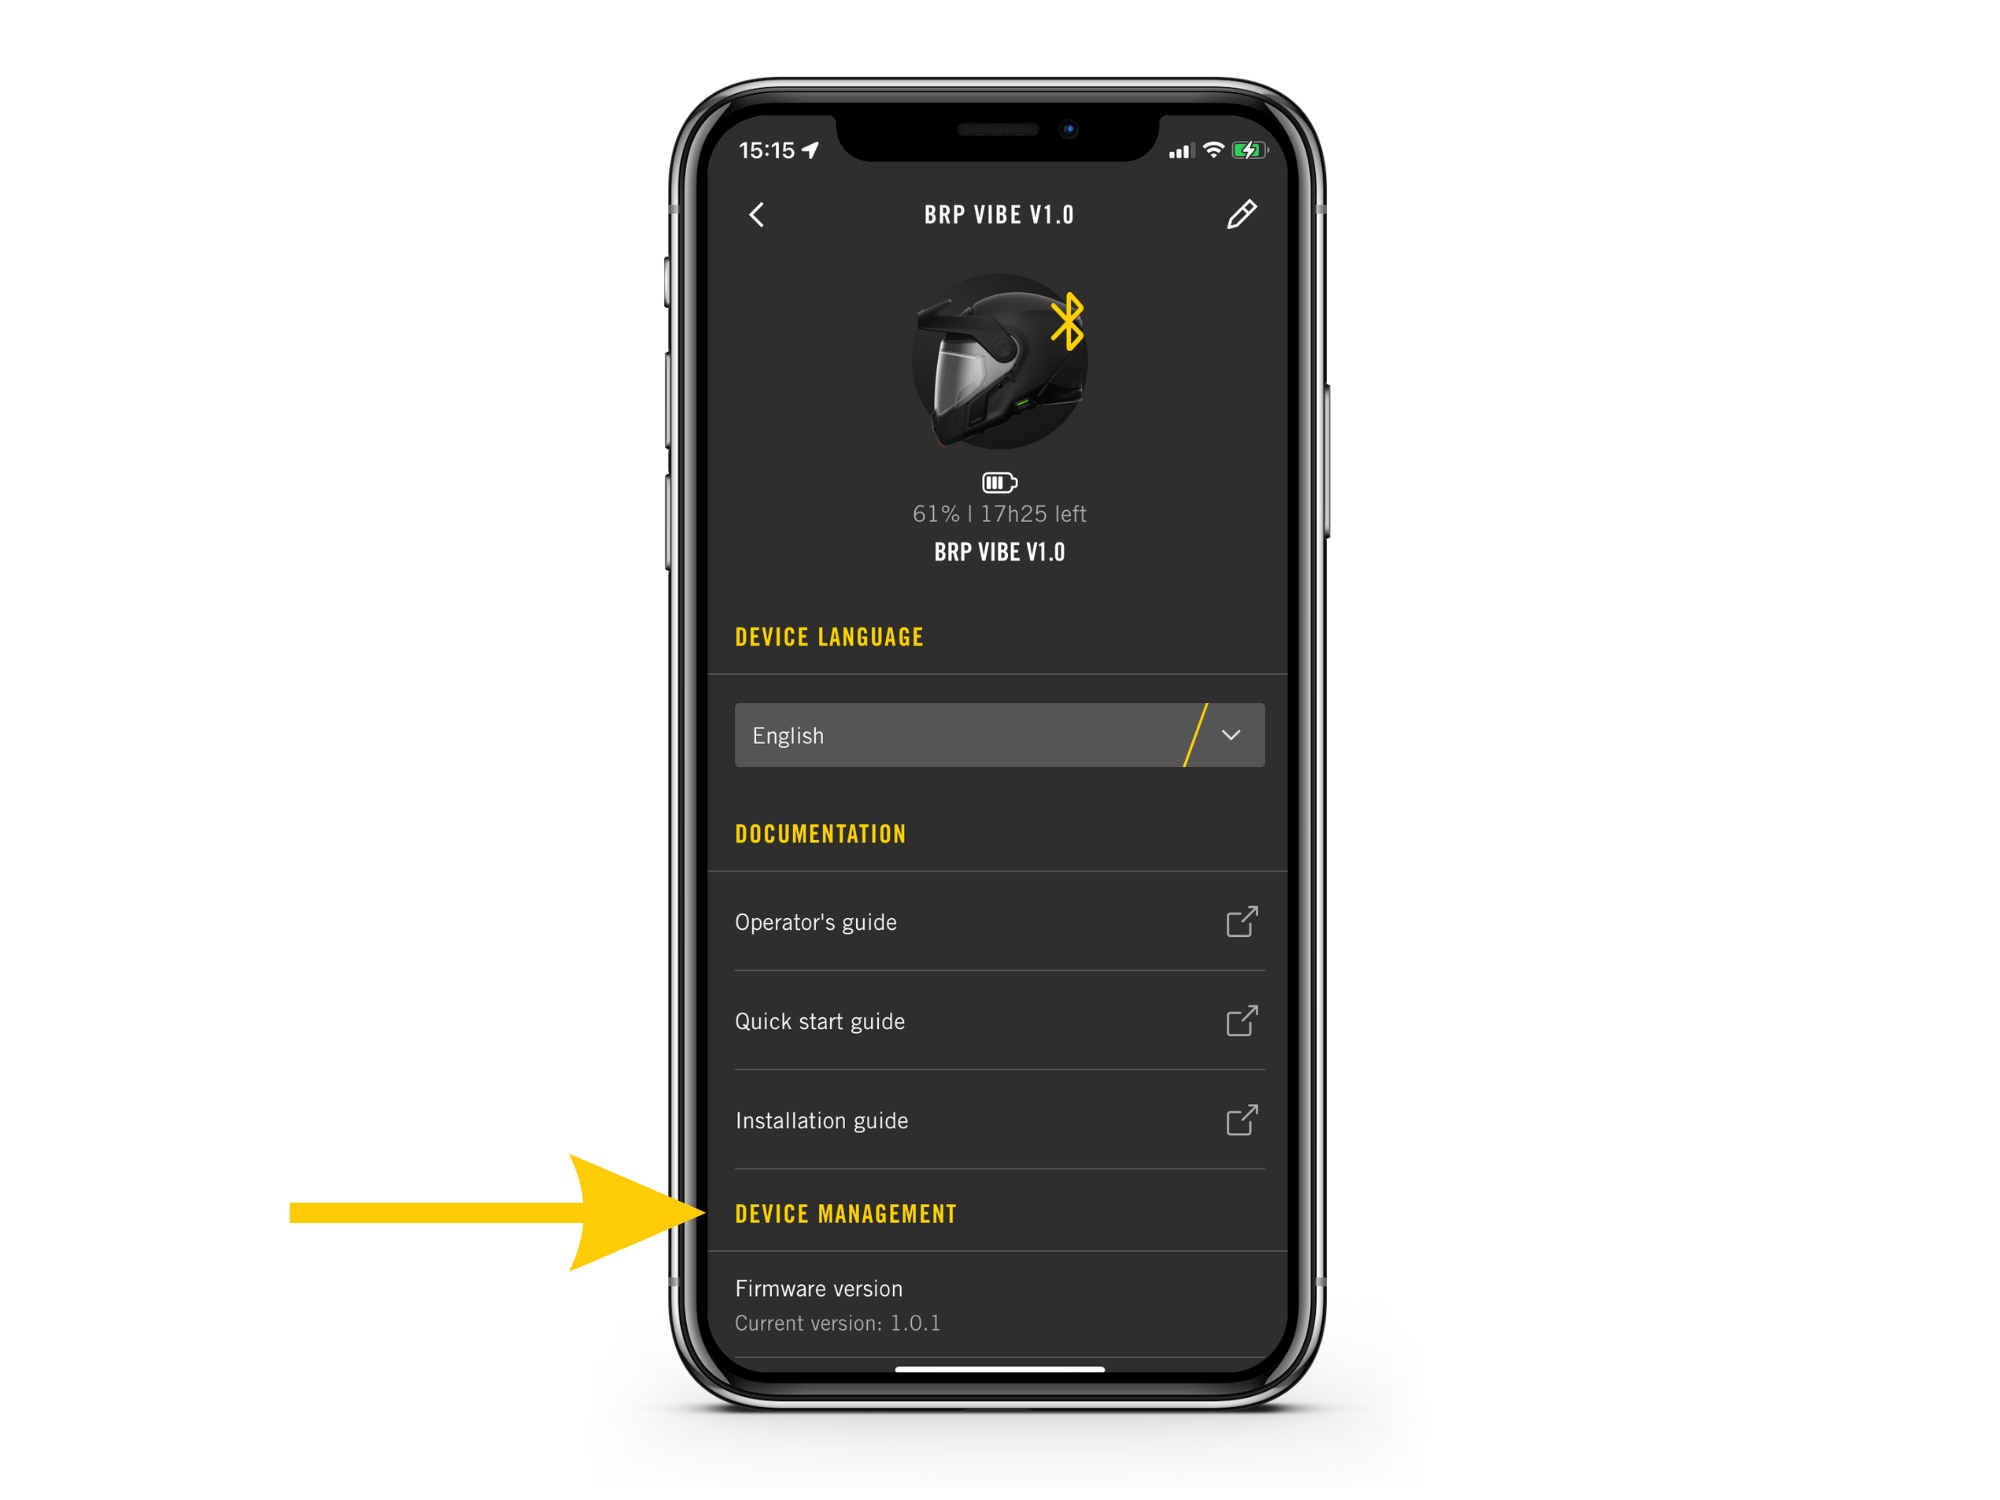 The BRP GO! app showing the Vibe device screen for firmware version